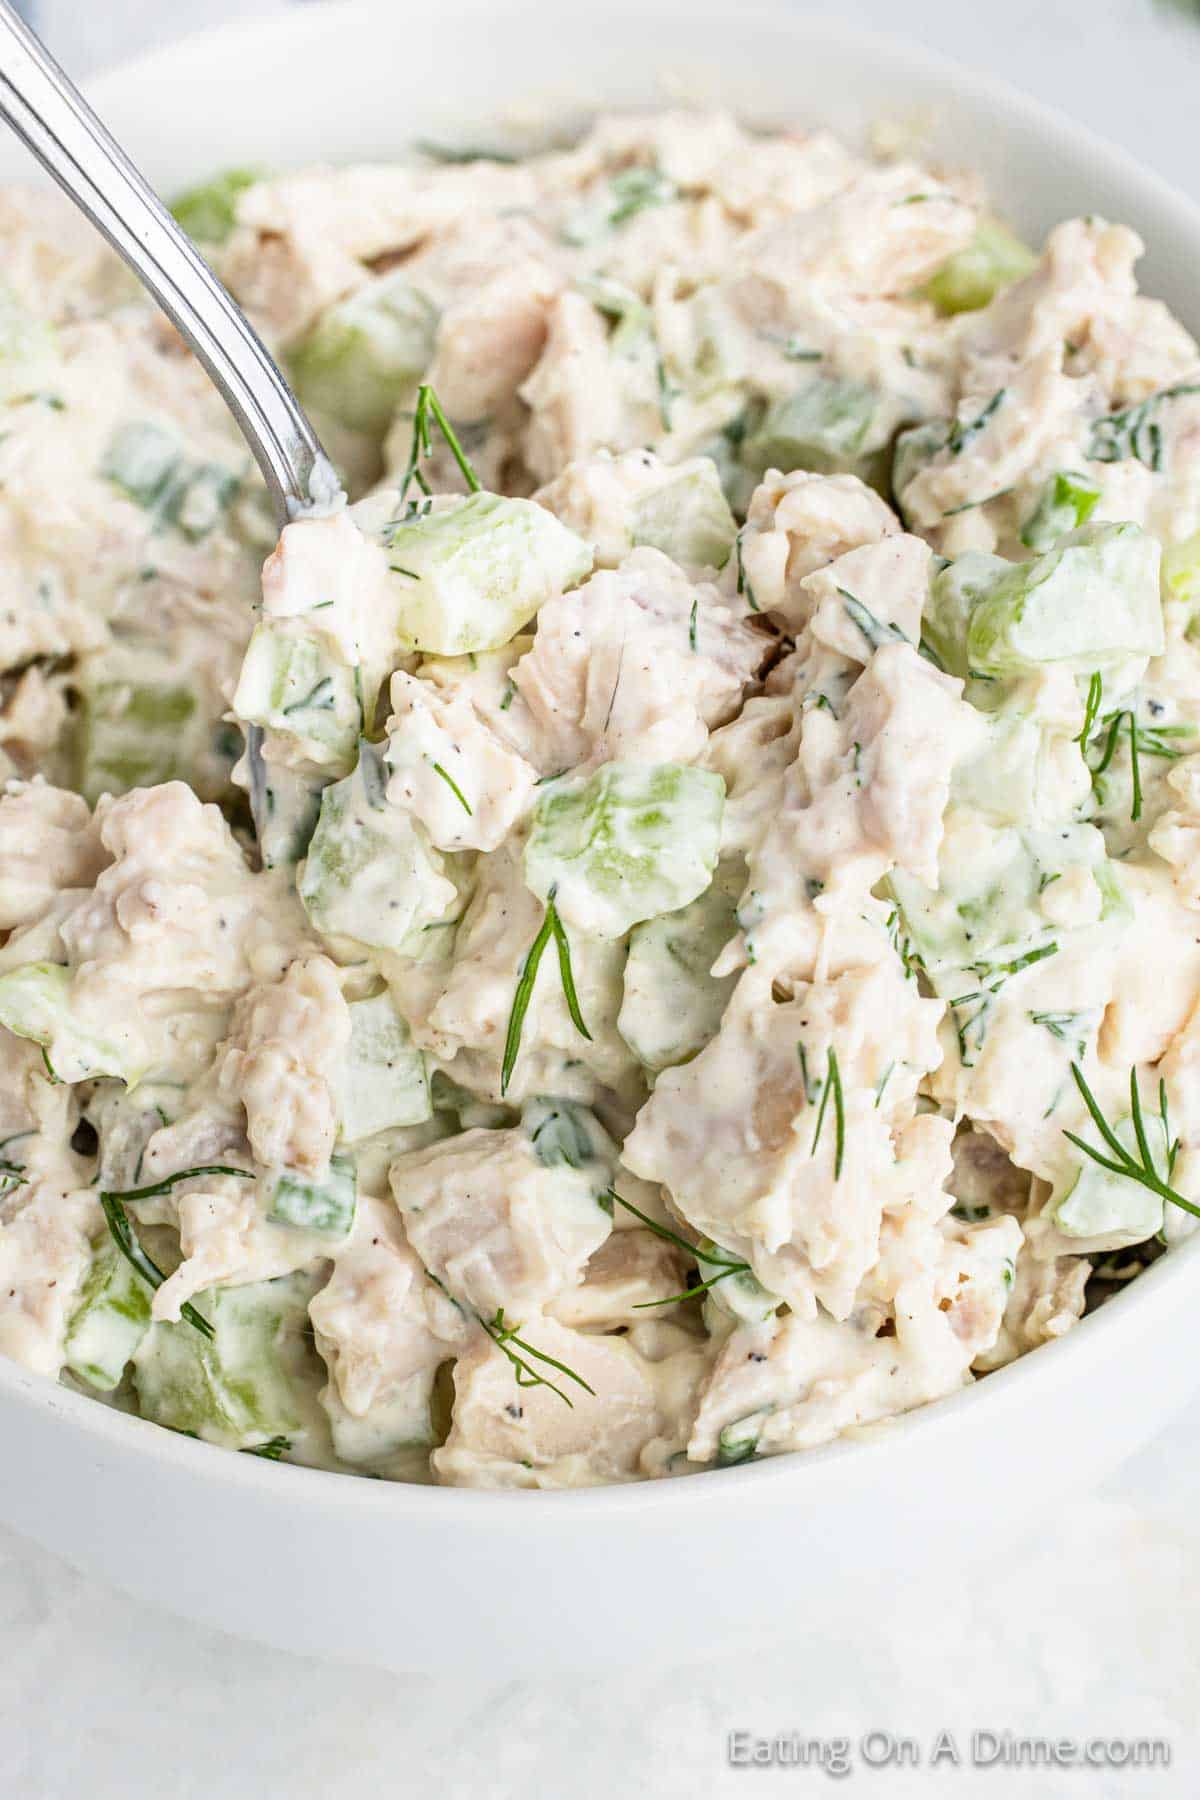 A white bowl filled with a creamy chicken salad, featuring diced chicken, celery, and fresh dill. A silver spoon is resting in the salad, which looks finely mixed and ready to serve—truly the best chicken salad recipe you'll ever find.